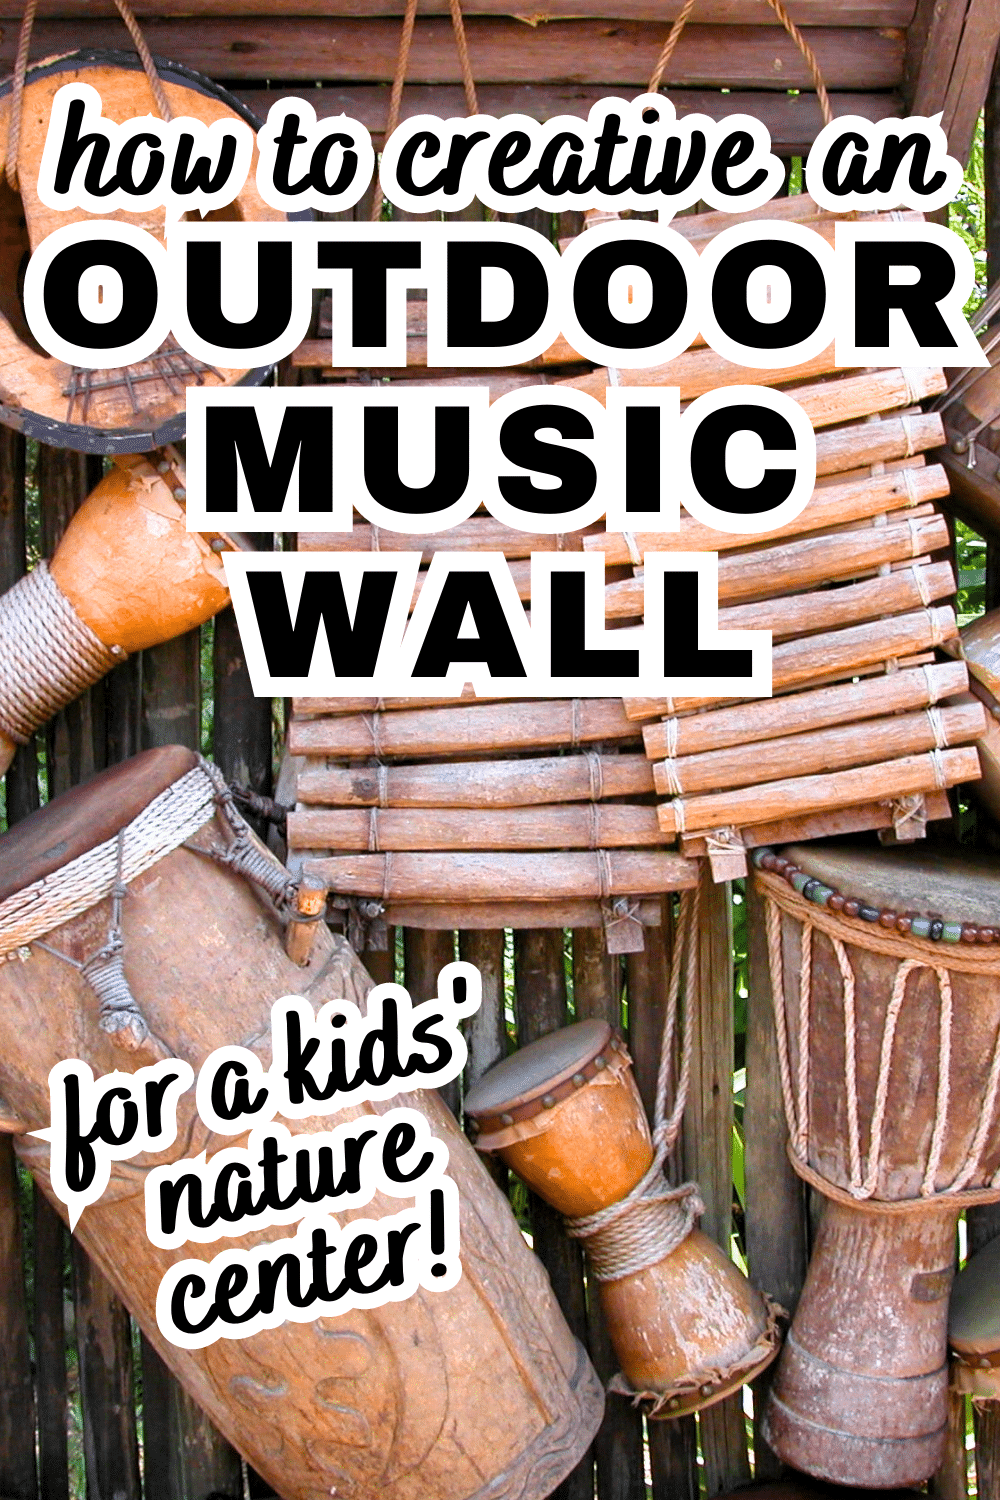 How To Make An Outdoor Musical Wall For Nature Class Room different wood instruments hanging from a wood fence